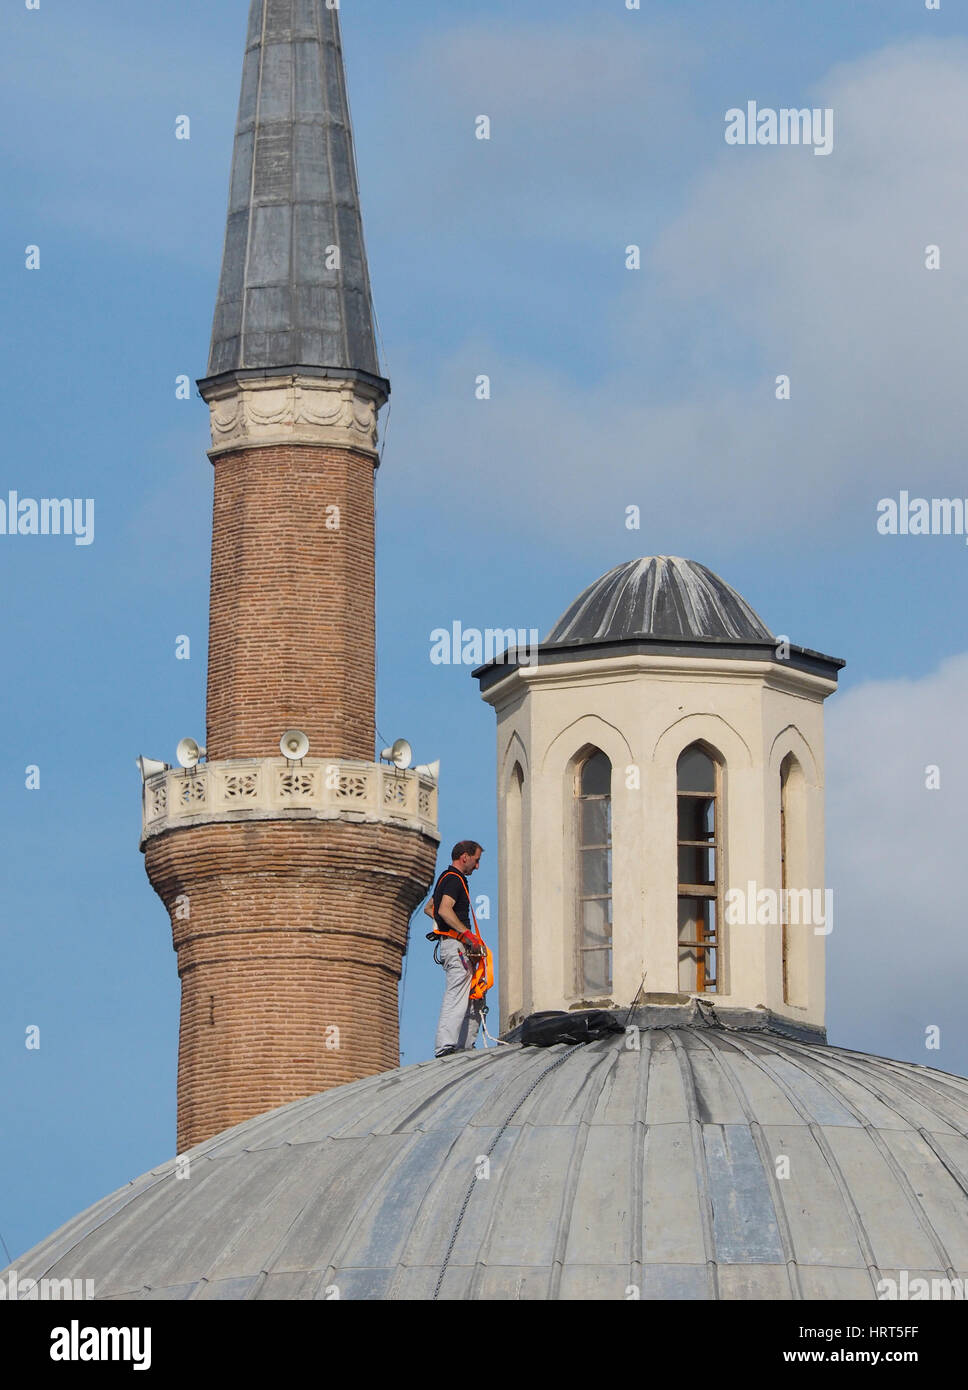 MAINTENANCE WORKER ON DOMED ROOF WITH SAFETY HARNESS NO HELMET SULTANAHMET AREA  NEAR HAGIA SOPHIA ISTANBUL TURKEY Stock Photo